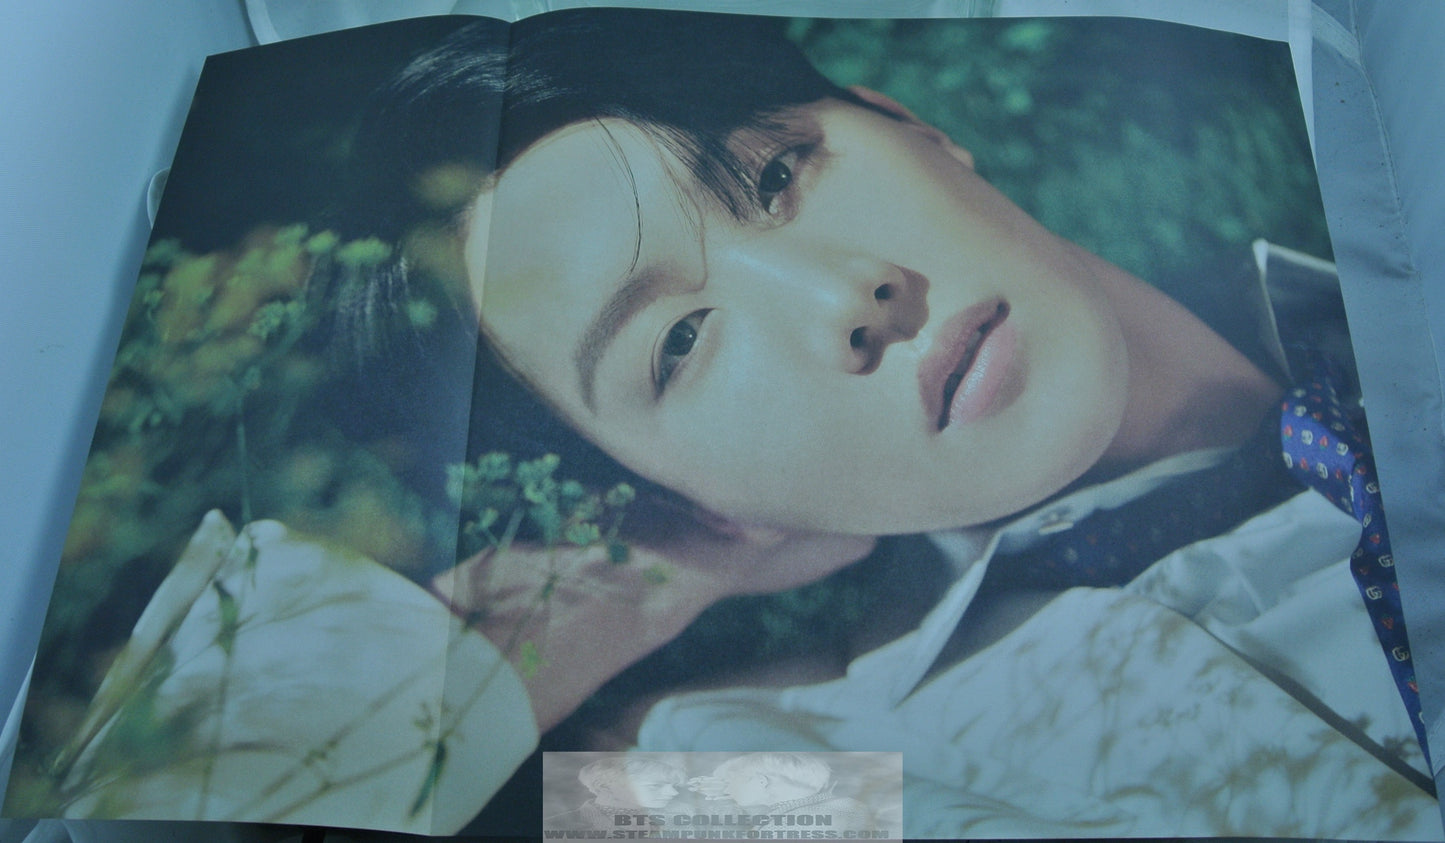 BTS J-HOPE JUNG HOSEOK FOLDED POSTER CLOSE LYING COLOR 11.75" X 16.5" HYBE INSIGHT LIMITED EDITION OFFICIAL MERCHANDISE